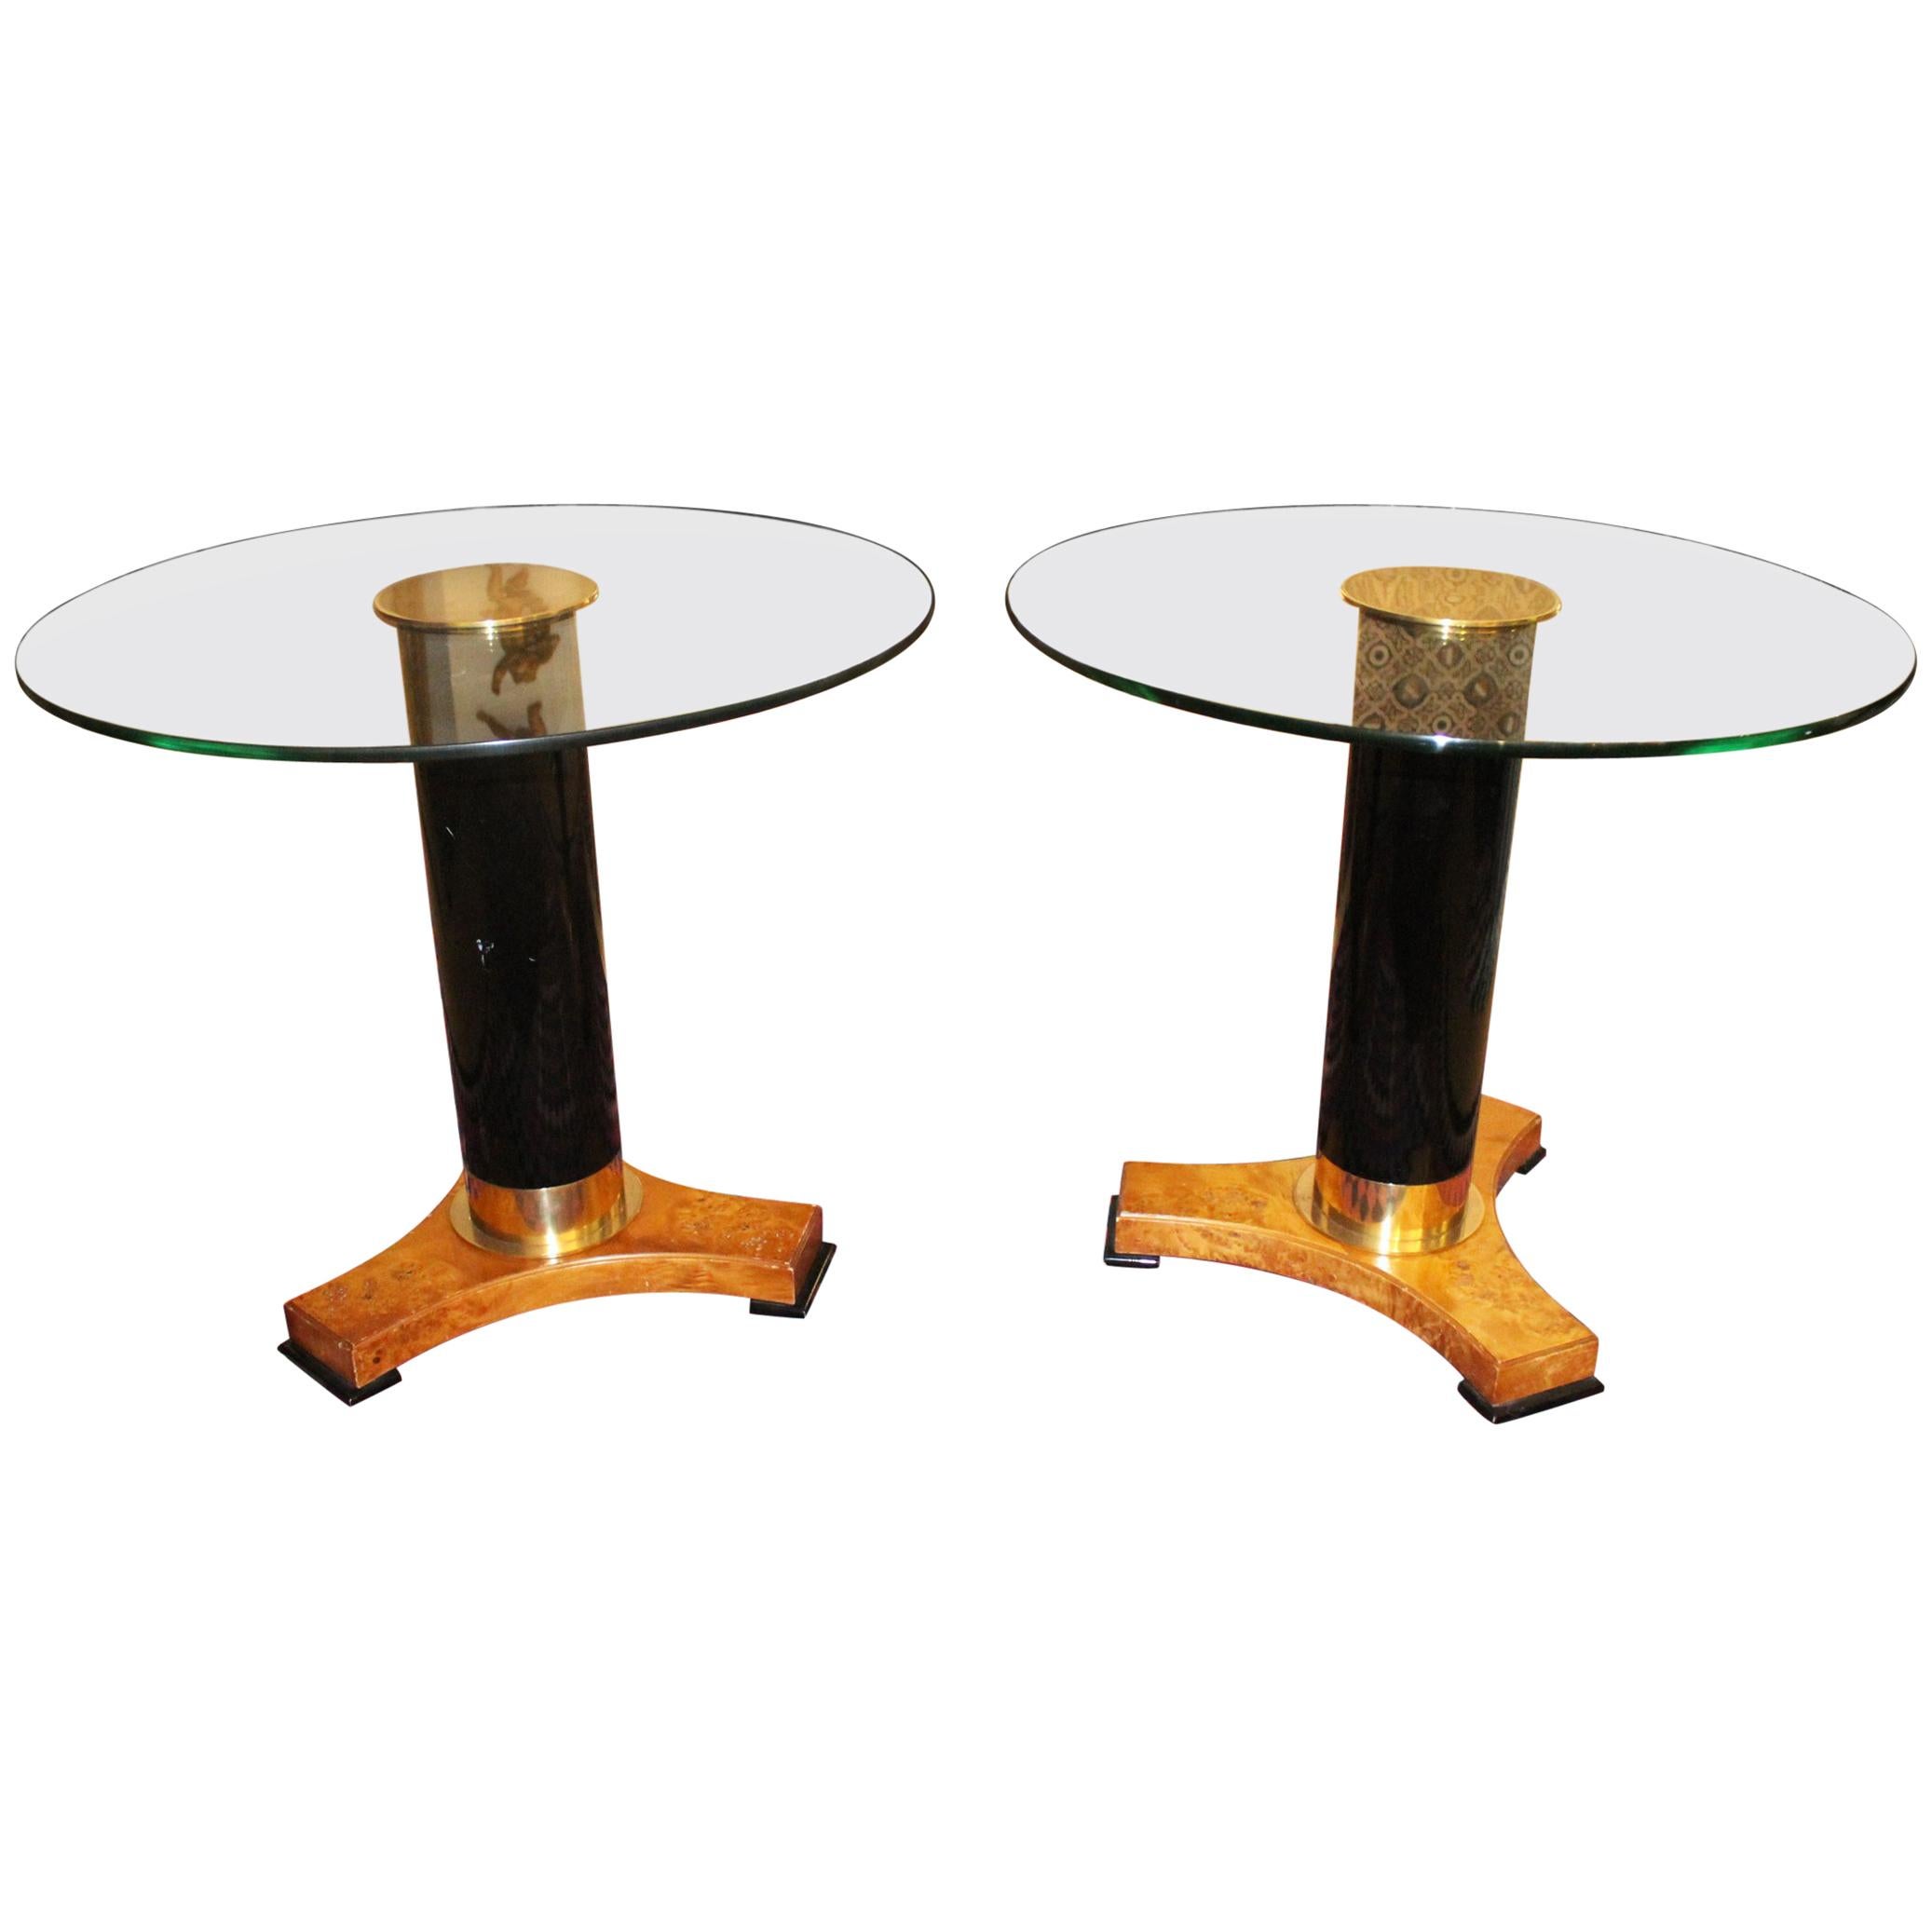 1980s Pair of Italian Round Glass Top Tables